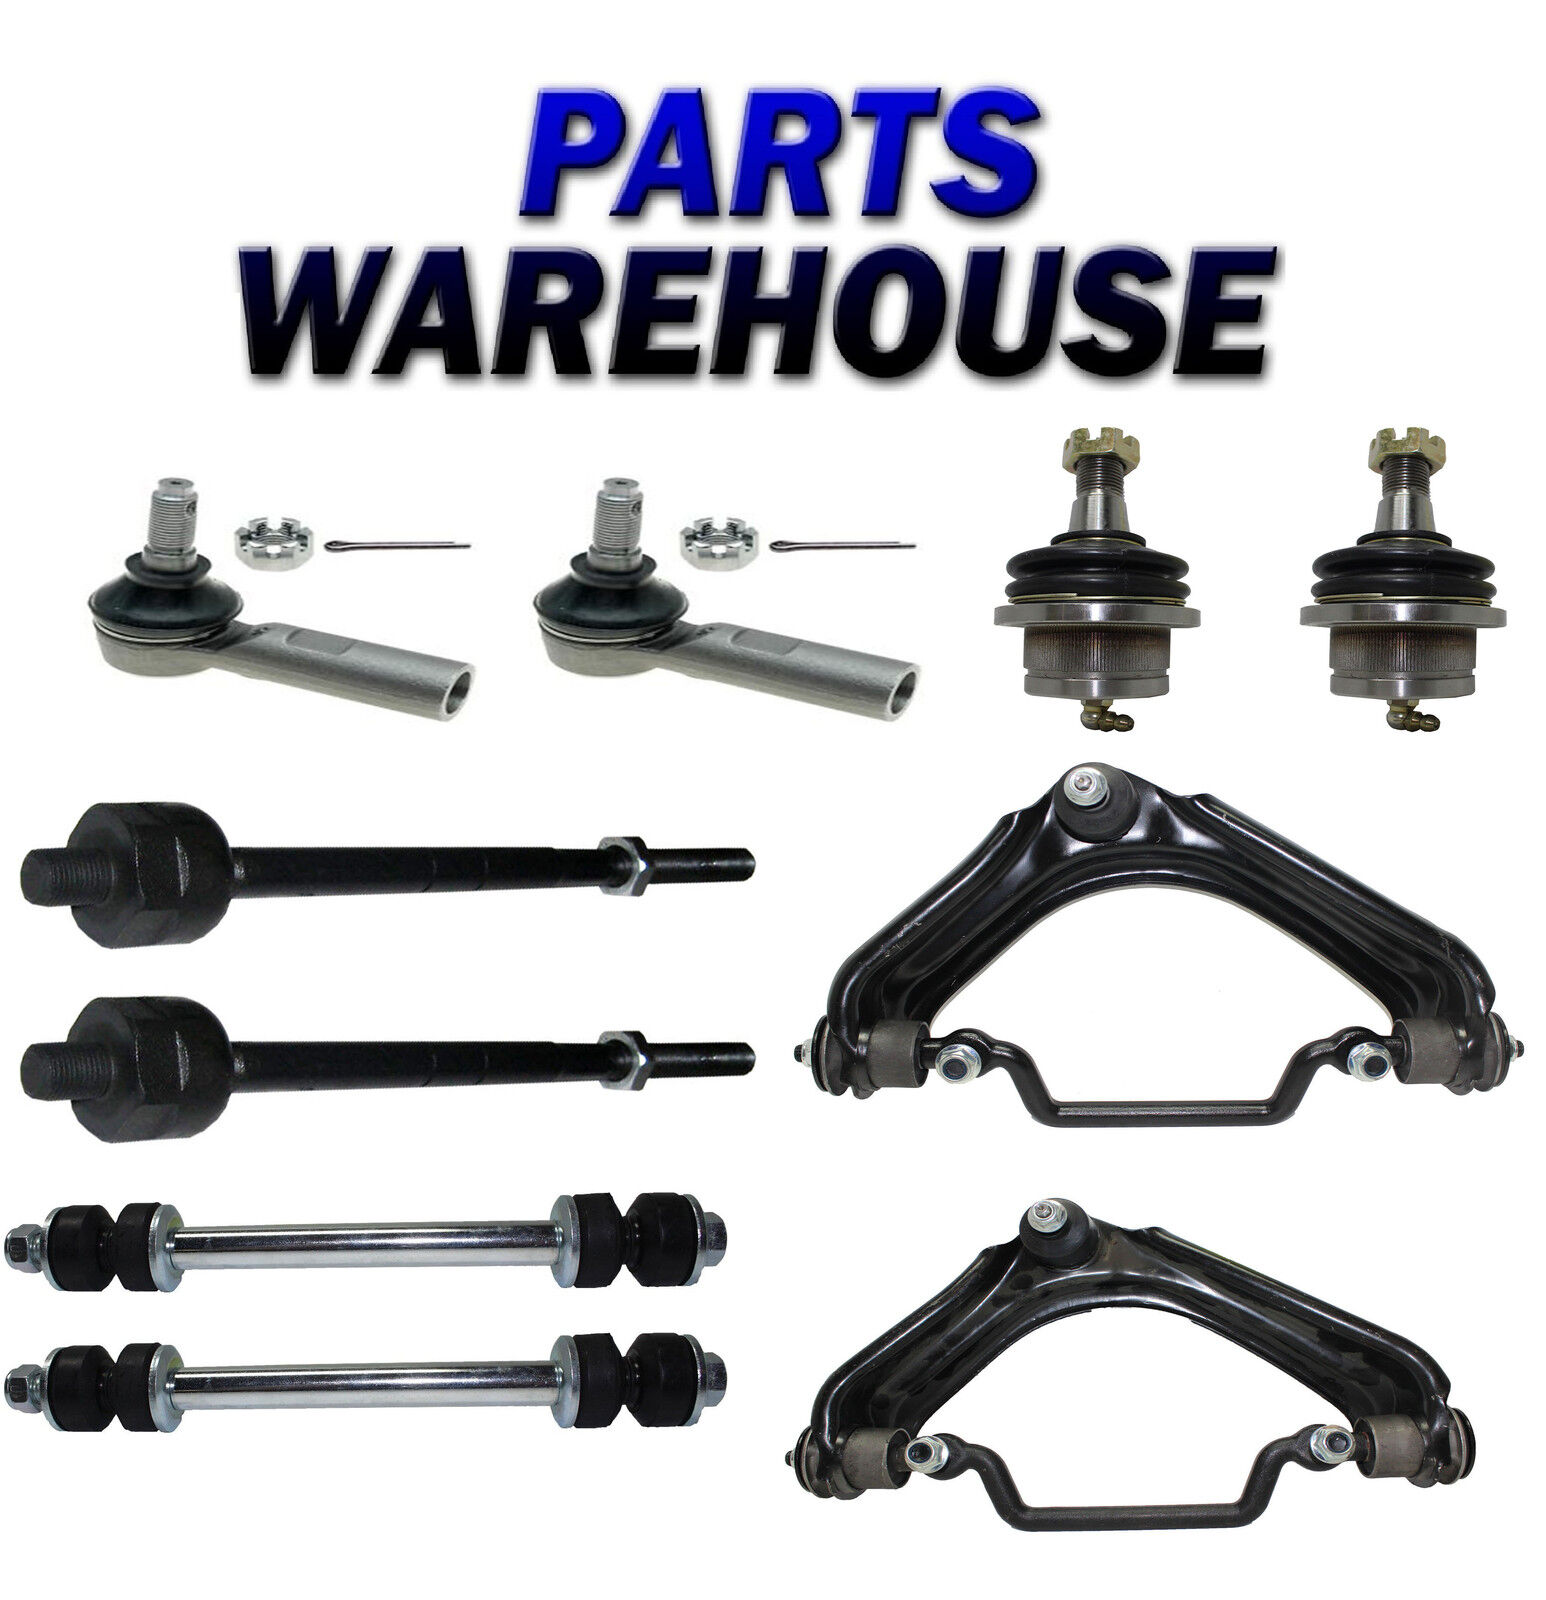 10pc Front Upper Control Arms Sway Bar Kit for Ford Explorer Mercury Mountaineer